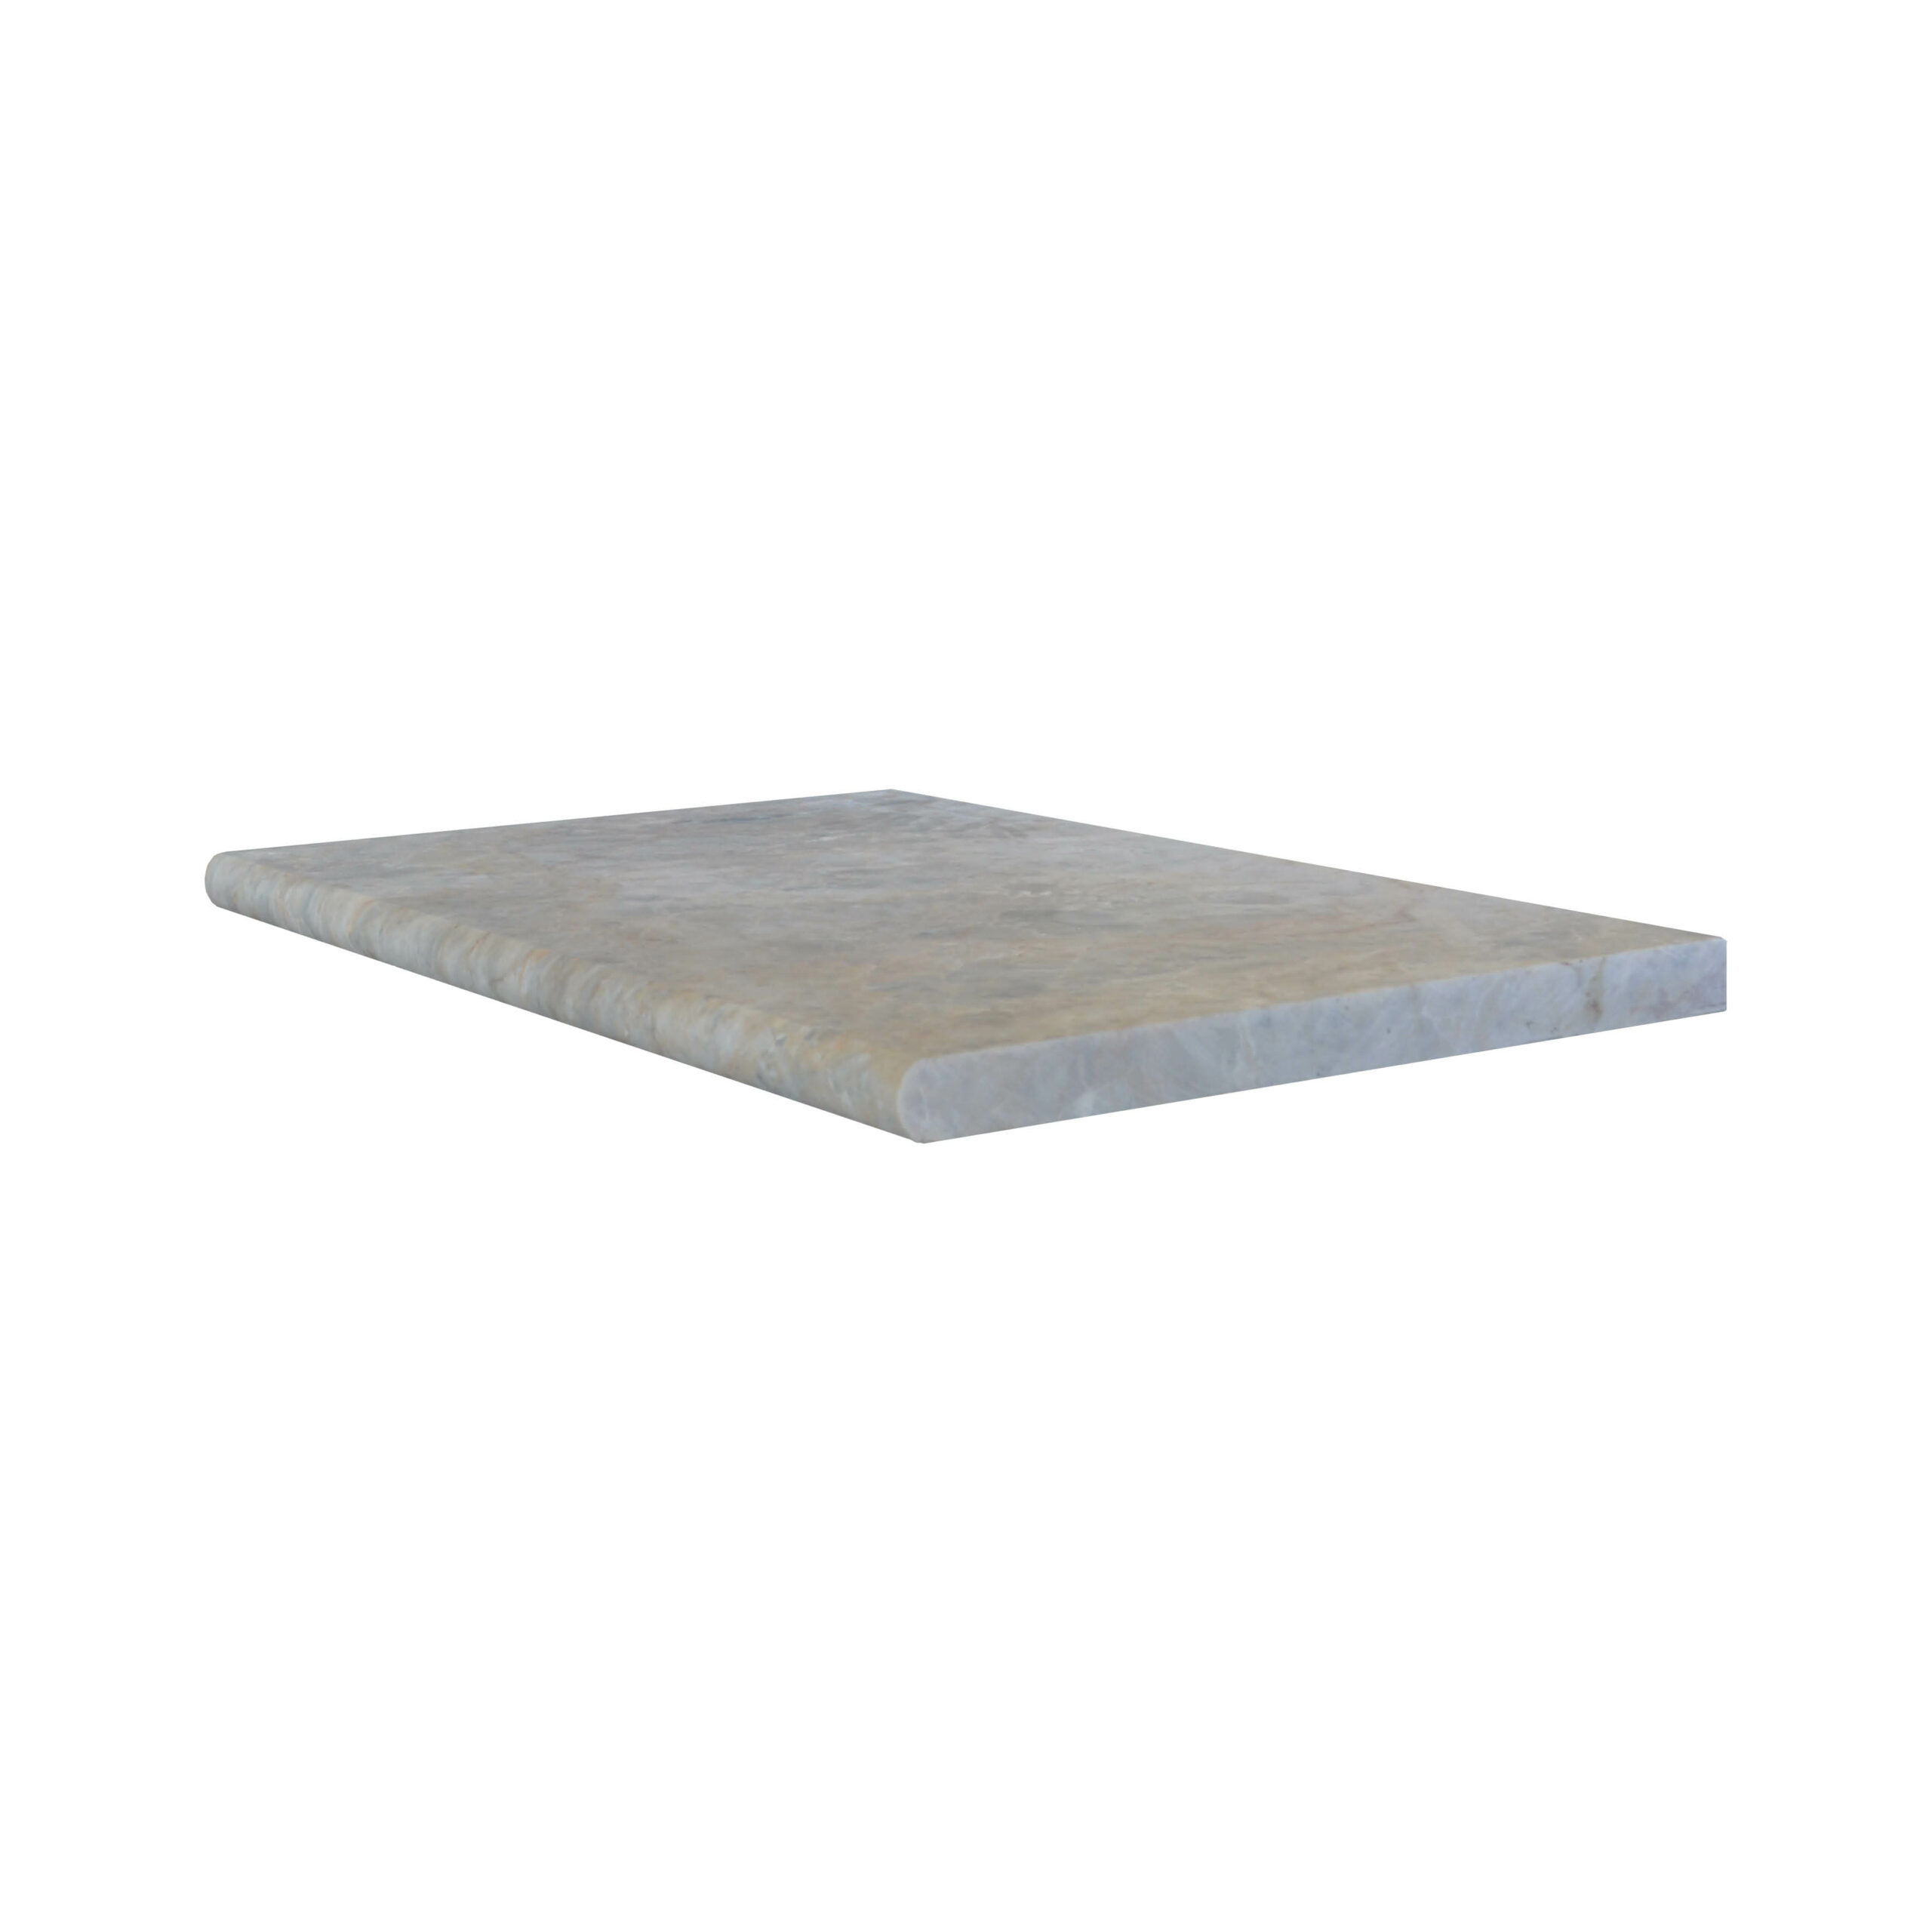 Storm Grey Marble Bullnose 600 x 600